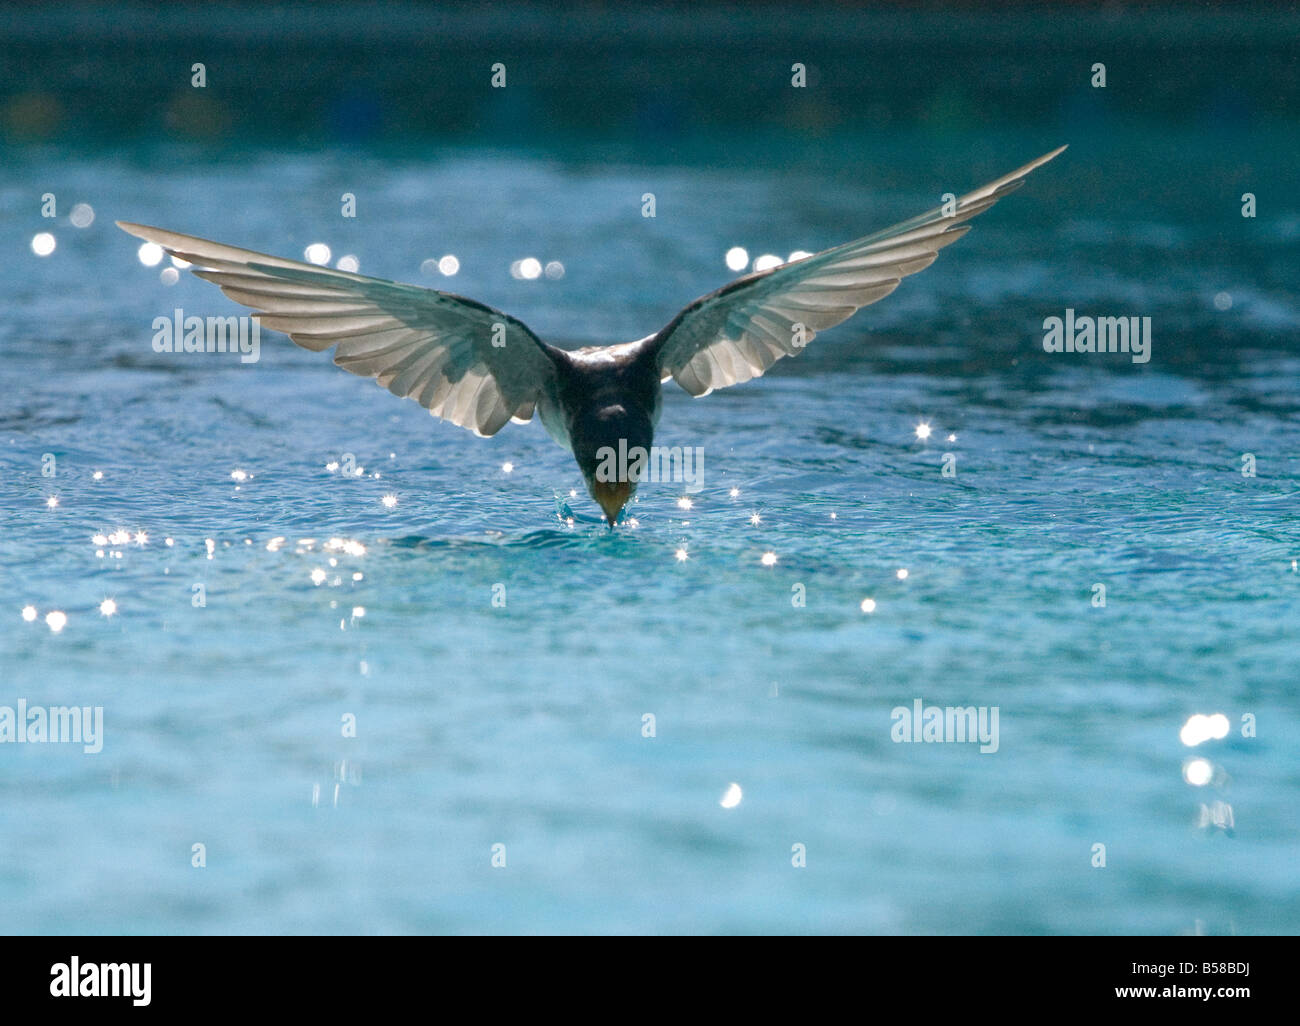 A migrating swallow skims across the surface of a pool and takes a drink of water Stock Photo